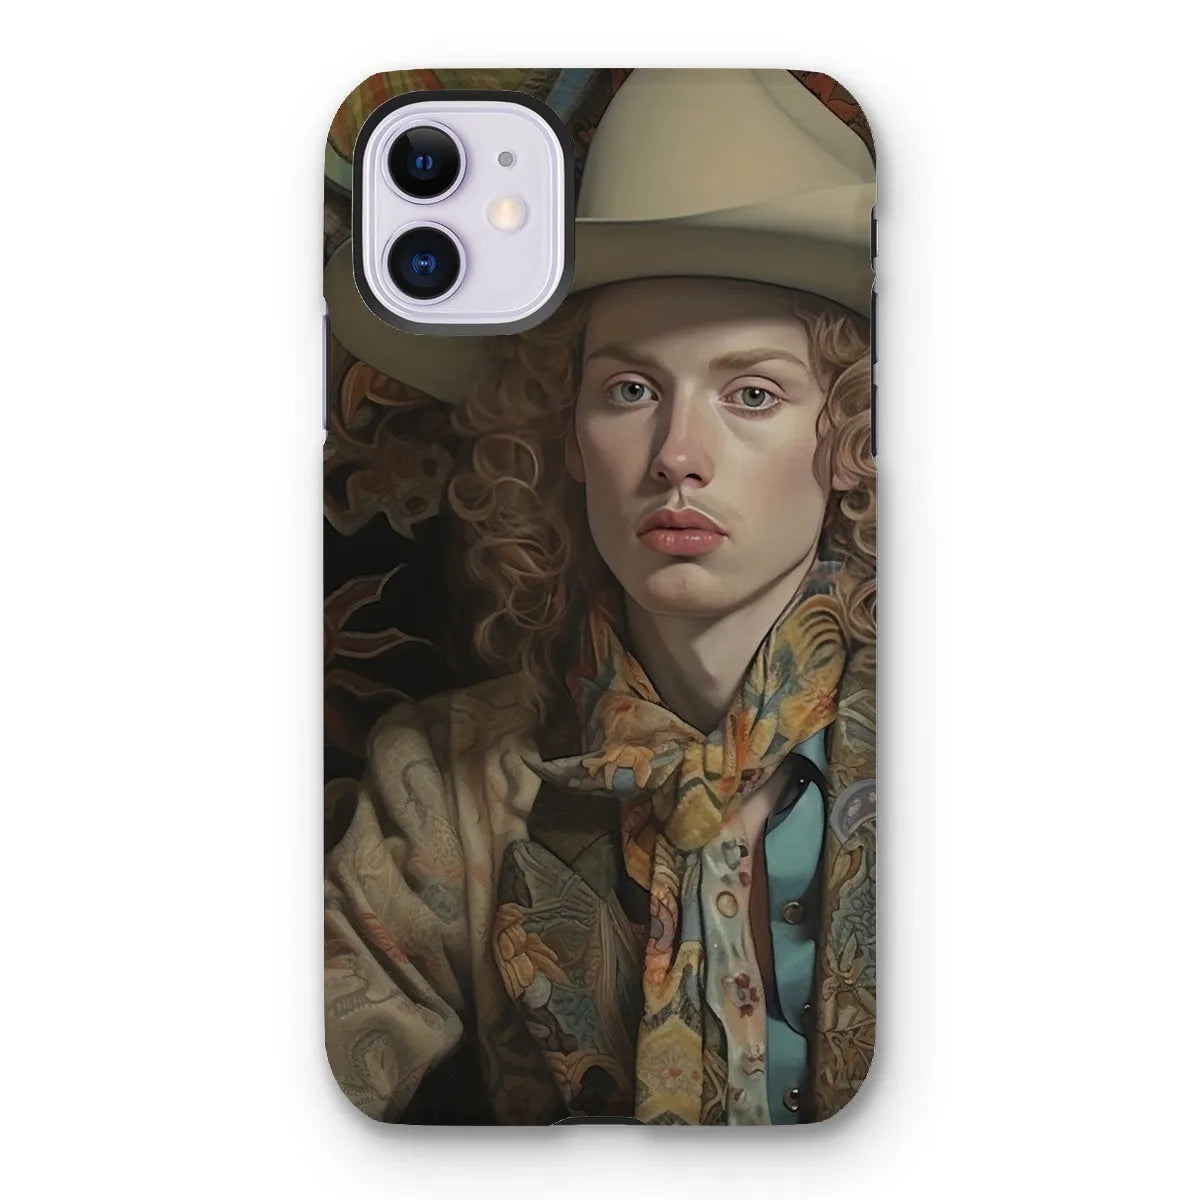 Ollie The Transgender Cowboy - F2m Dandy Outlaw Phone Case - Iphone 11 / Matte - Mobile Phone Cases - Aesthetic Art